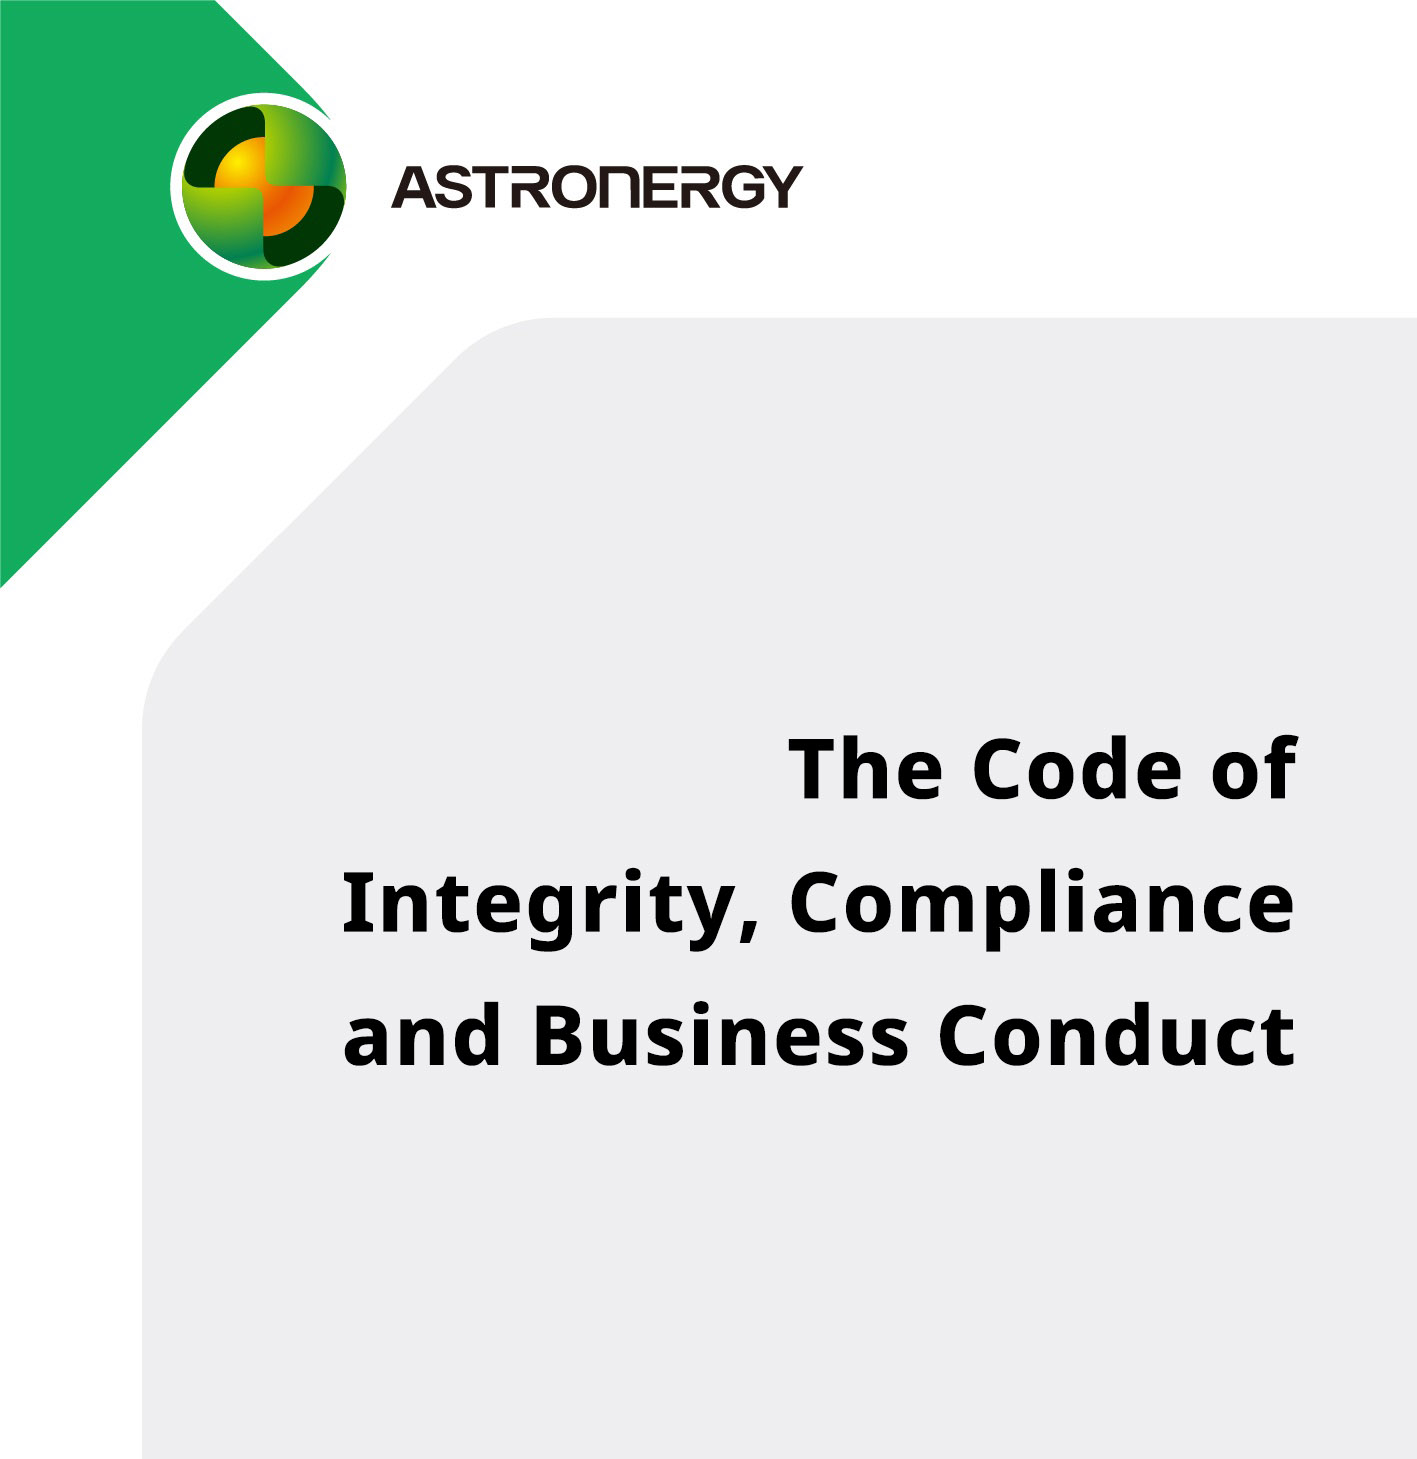 The Code of Integrity, Compliance and Business Conduct